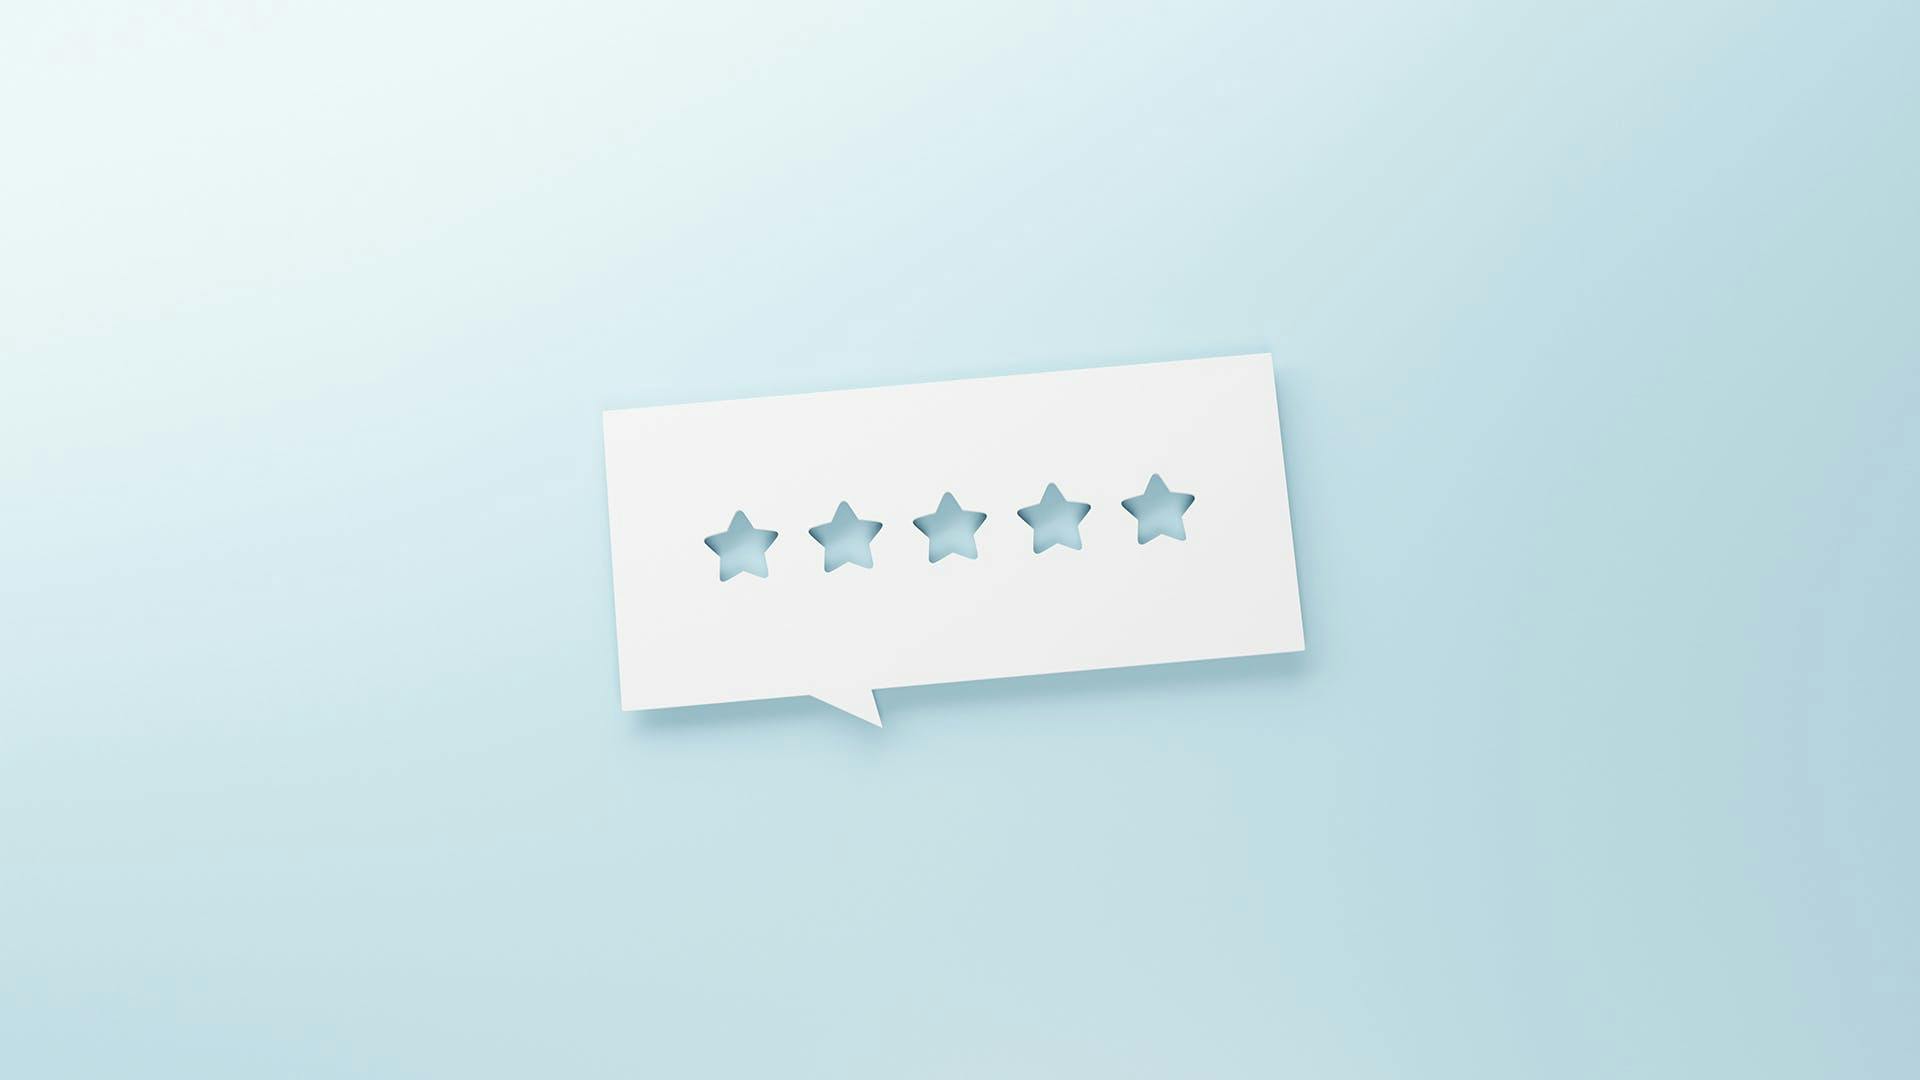 An image of a white chat bubble with five stars in the center. The stars are cut out of the paper chat bubble so that you can see the blue background underneath. The image represents an online review that marketing teams may find or manage using an online reputation management software.